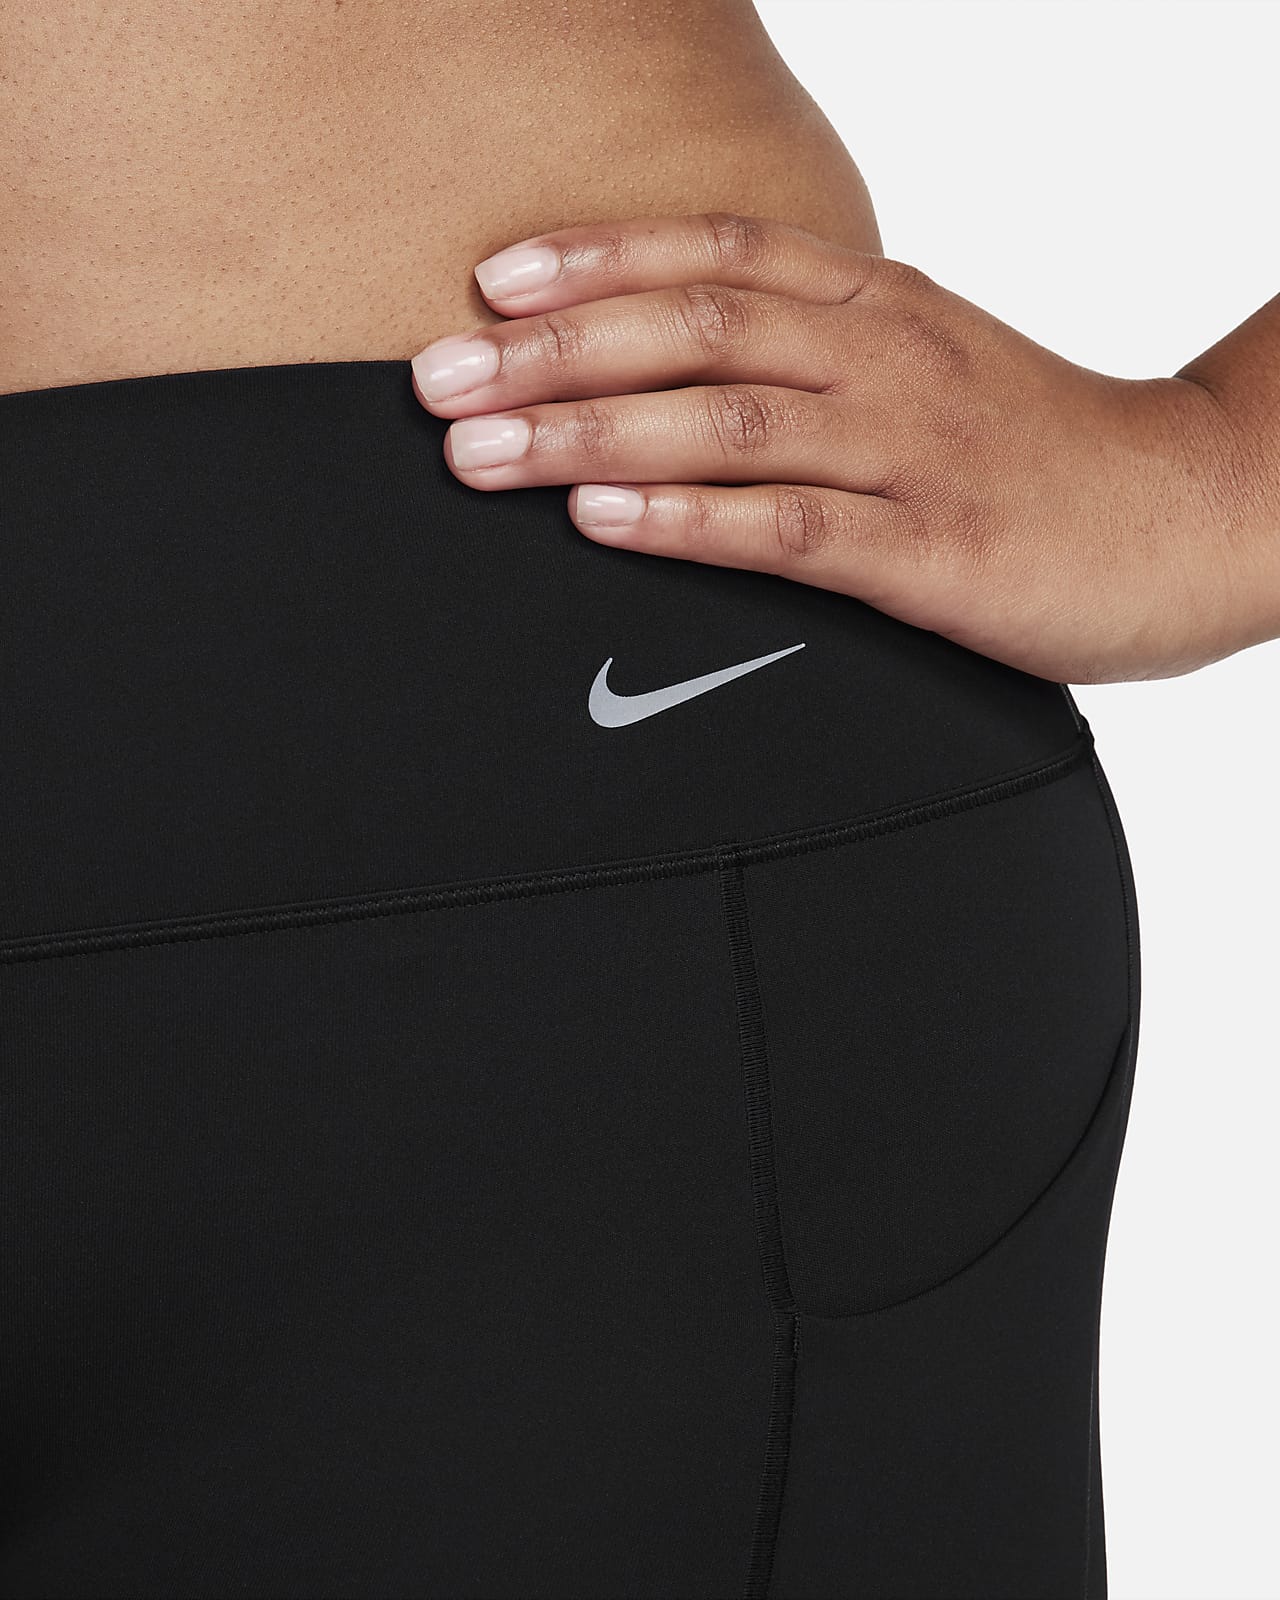 Nike Universa Women's Medium-Support High-Waisted 7/8 Printed Leggings with  Pockets - Brown, FN4170-237